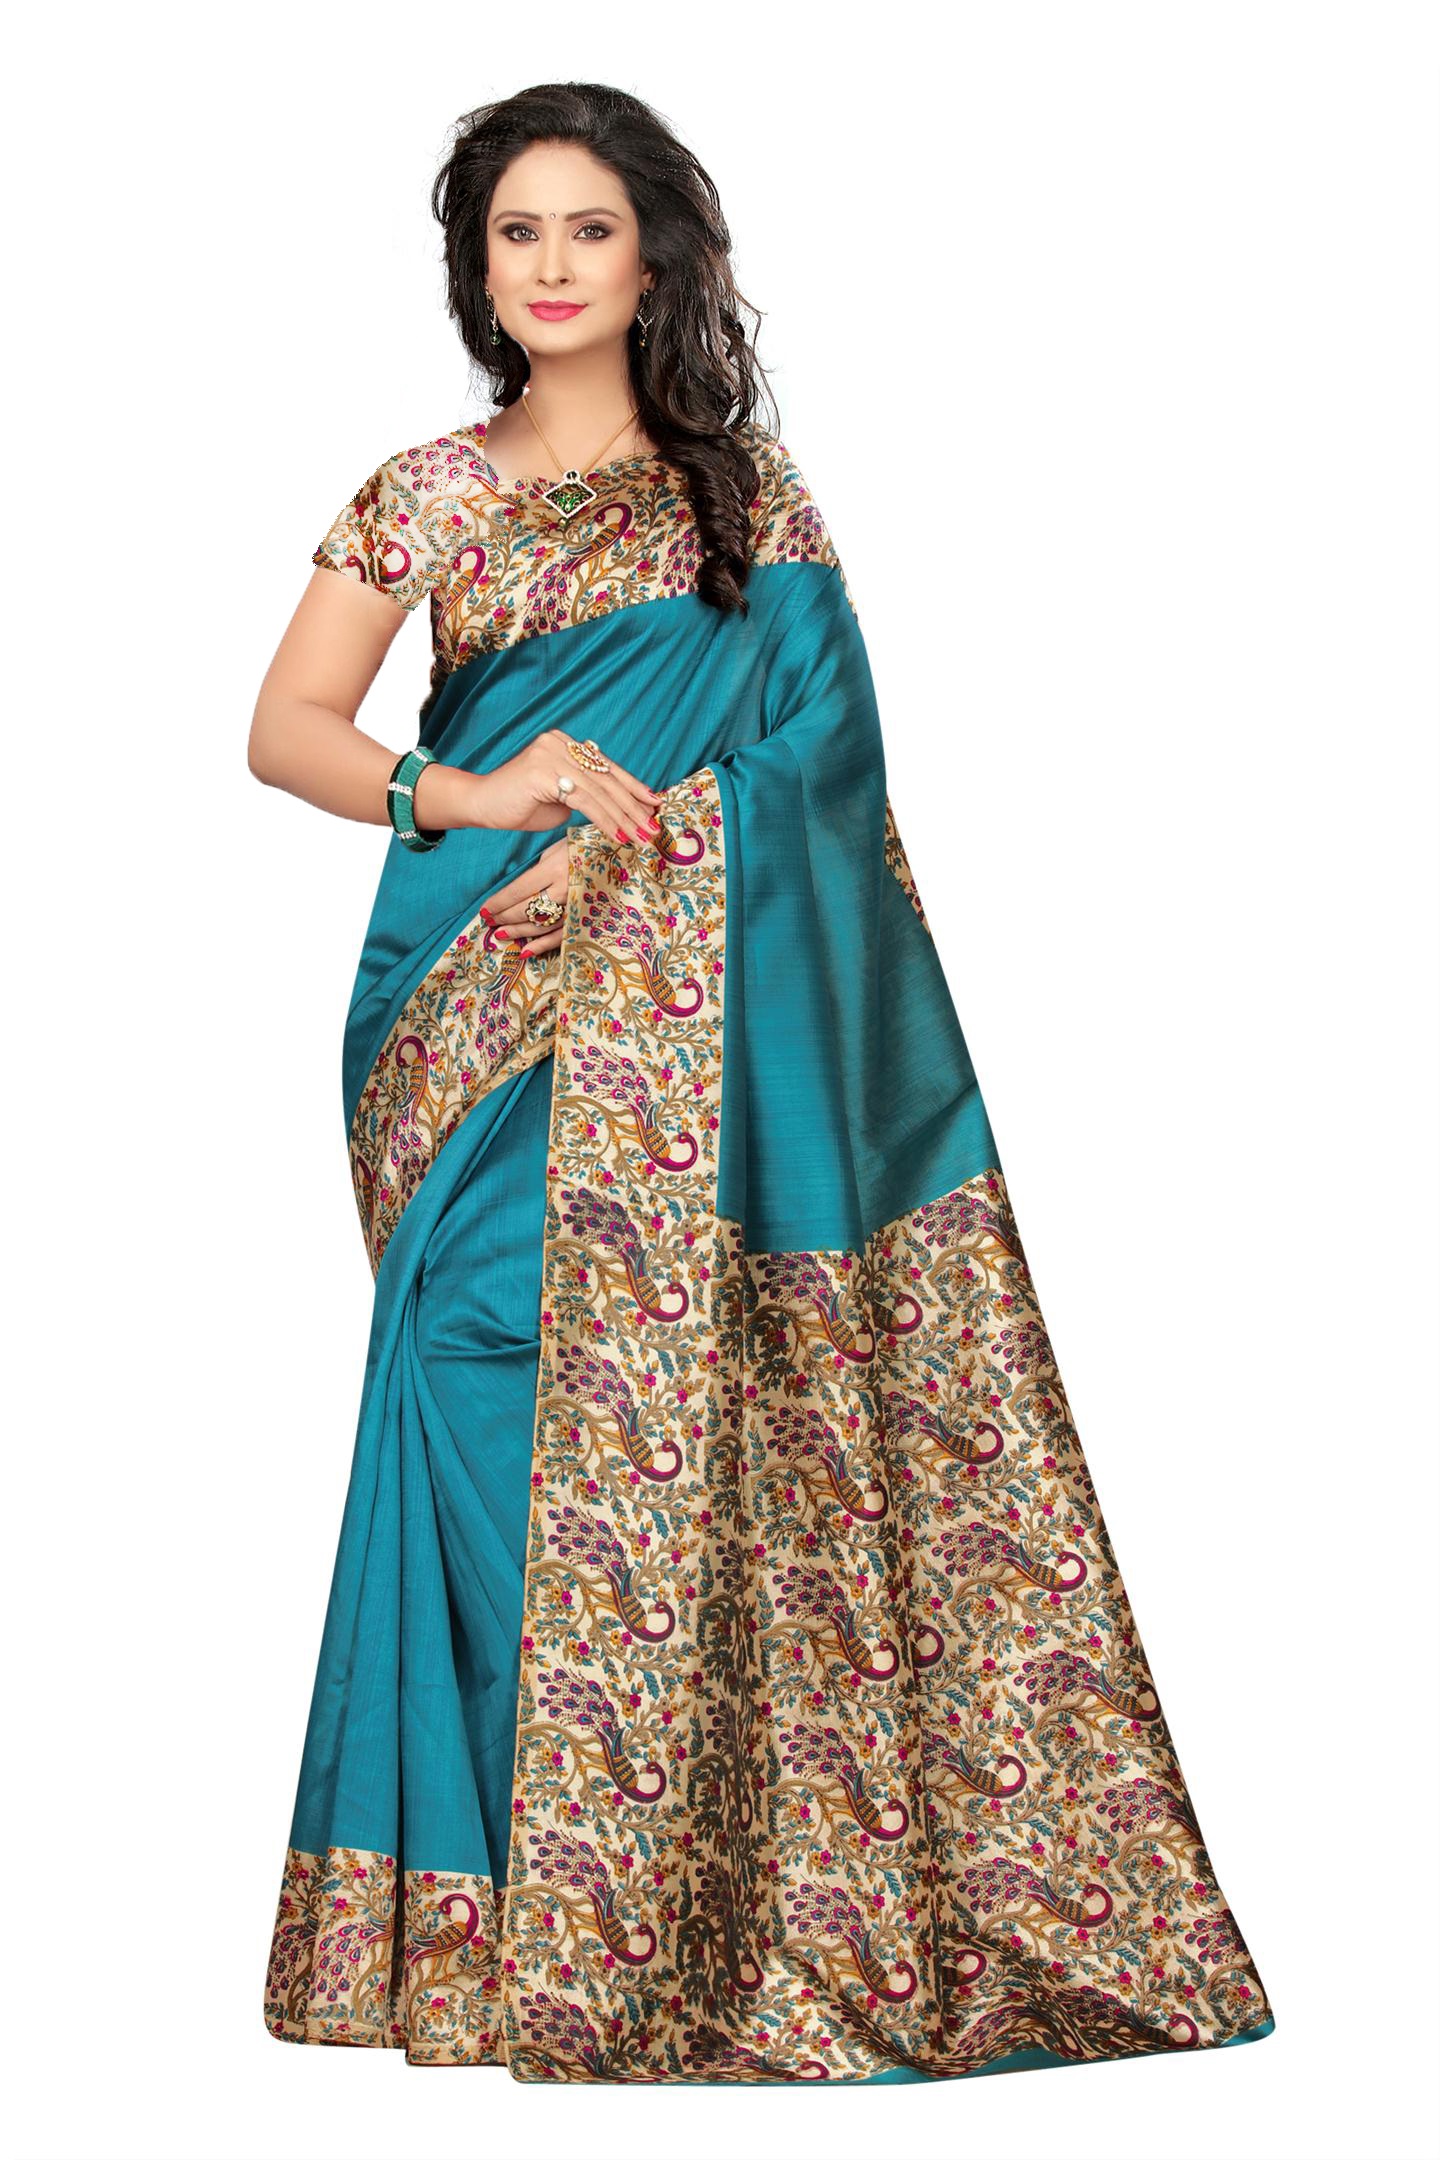 Buy Indian Beauty Women's Mysore Silk With Blouse Saree With Unstiched ...